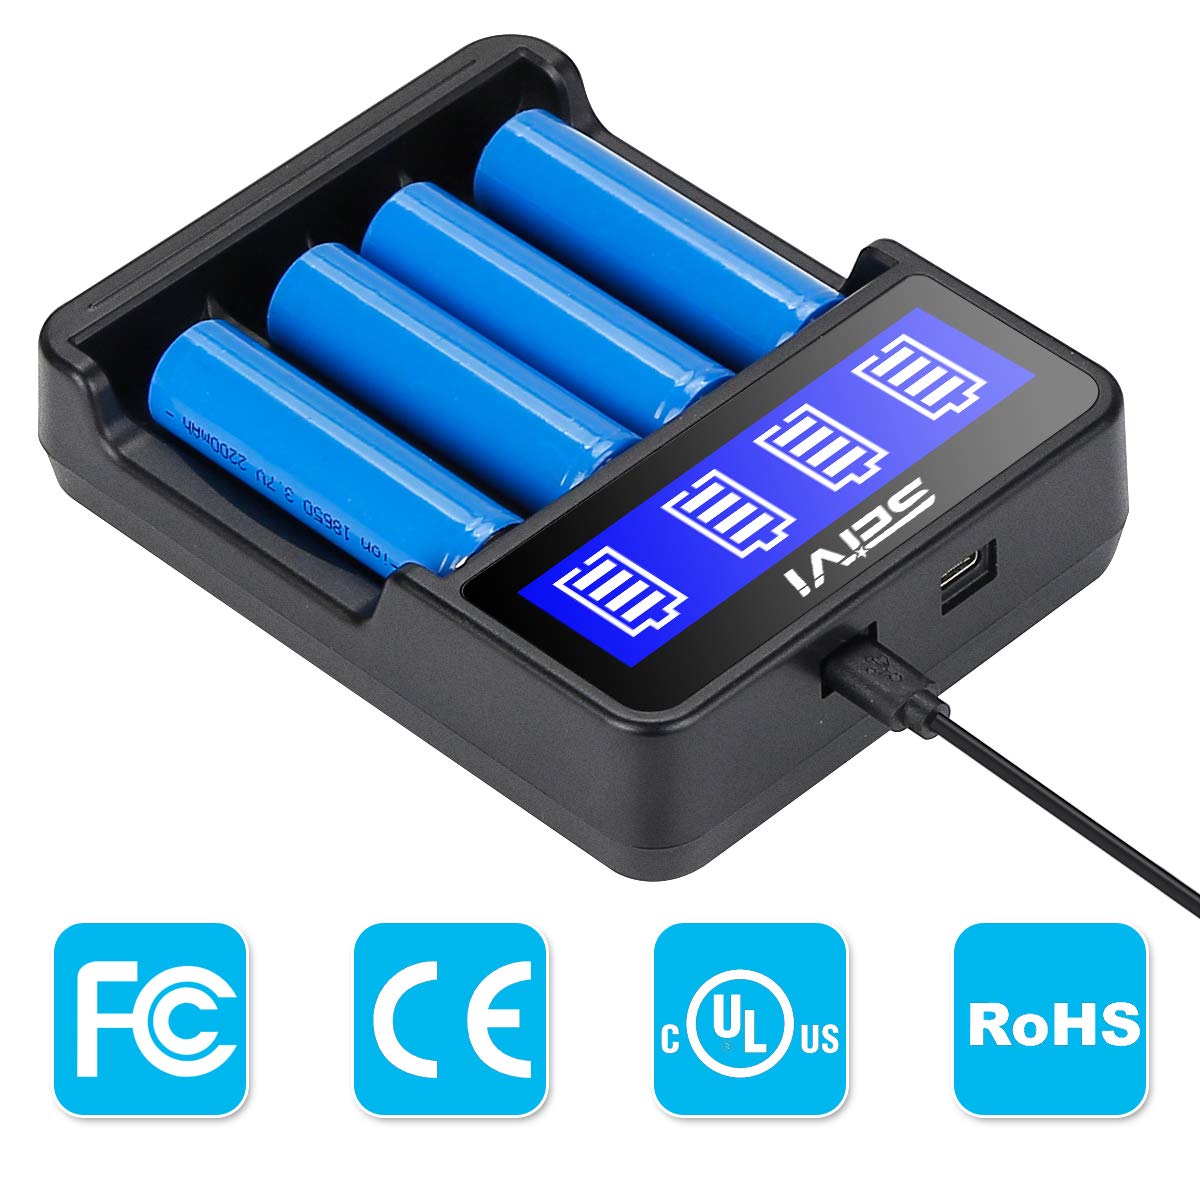 18650 Battery Charger, SEIVI LCD Display Universal Smart Charger for Rechargeable Batteries Li-ion Batteries 18650 26650 18490 17670 17500 16340 14500, Ni-MH/Ni-Cd A AA AAA Batteries